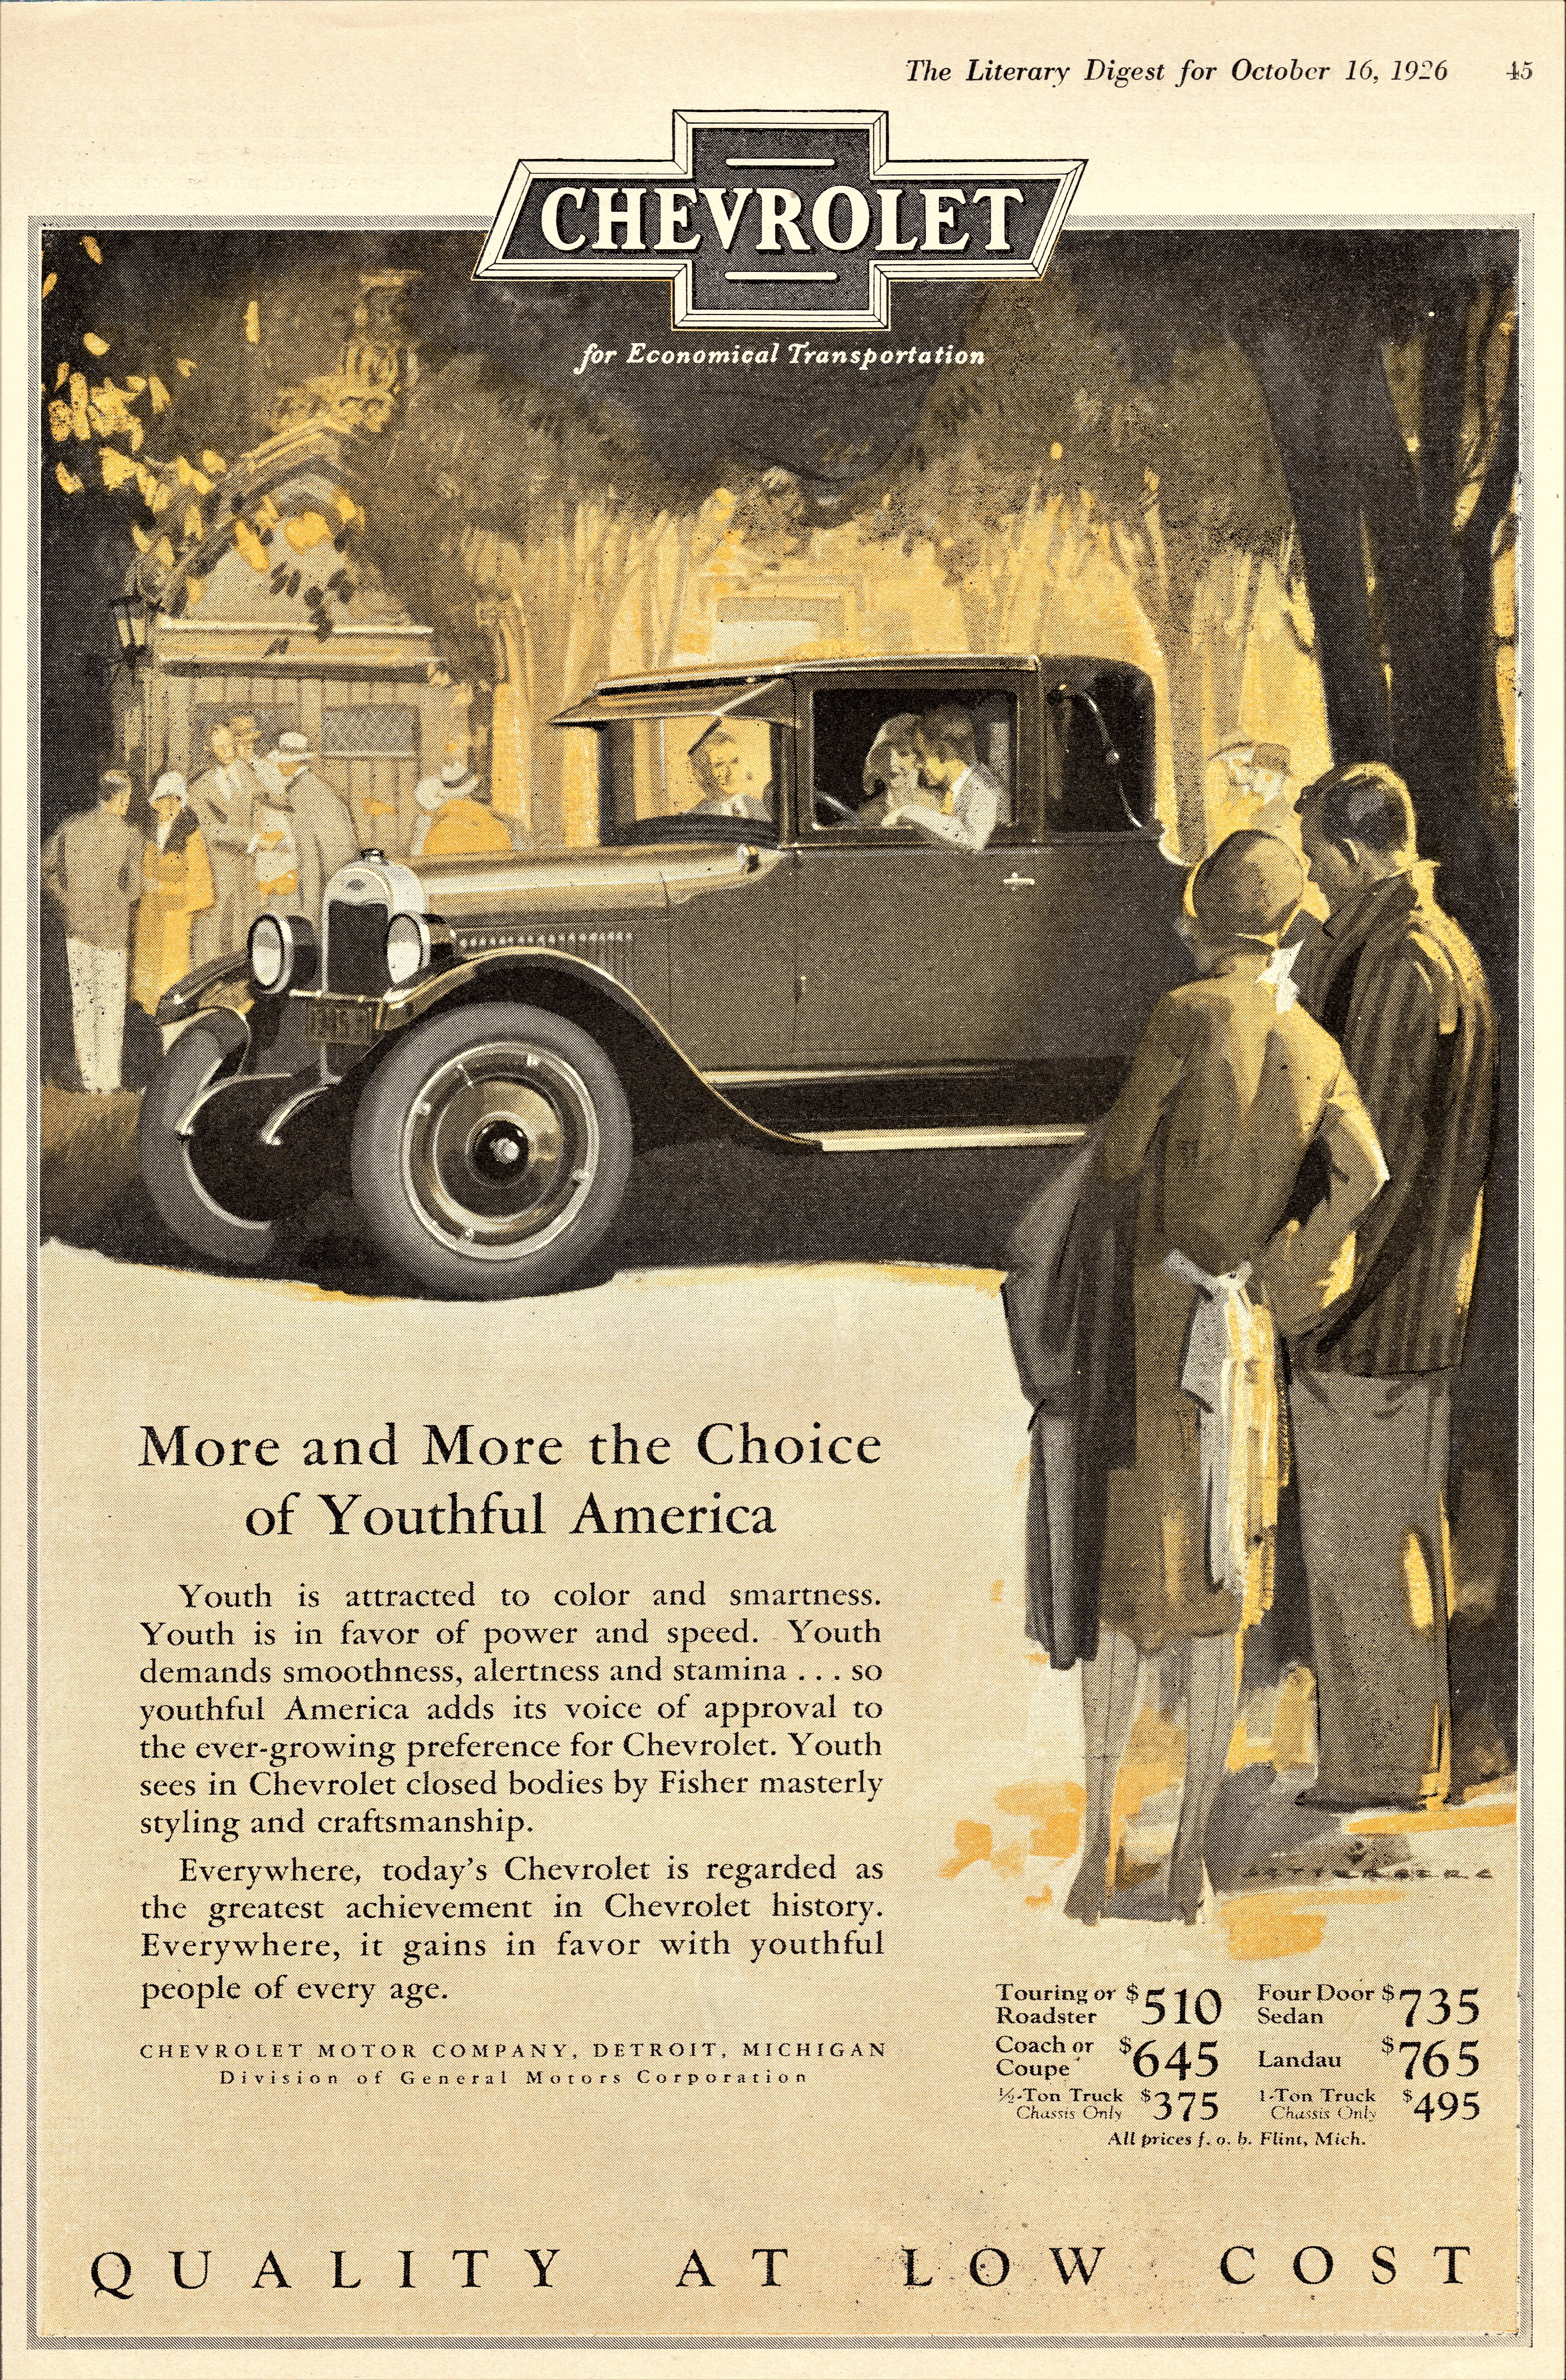 1926 Chevrolet Coupe - published in The Literary Digest - October 16, 1926